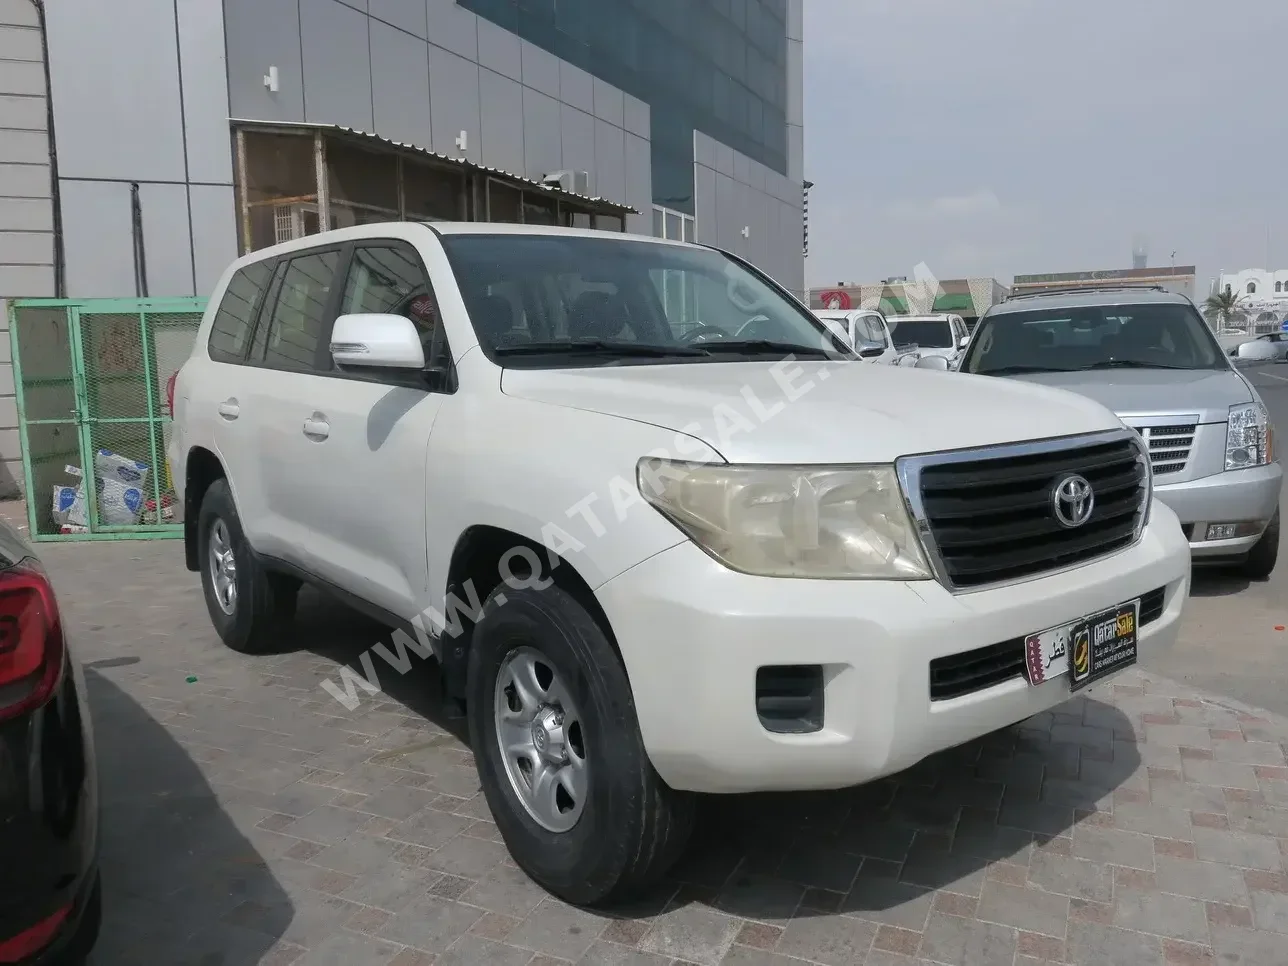 Toyota  Land Cruiser  G  2013  Automatic  39,000 Km  6 Cylinder  Four Wheel Drive (4WD)  SUV  Pearl